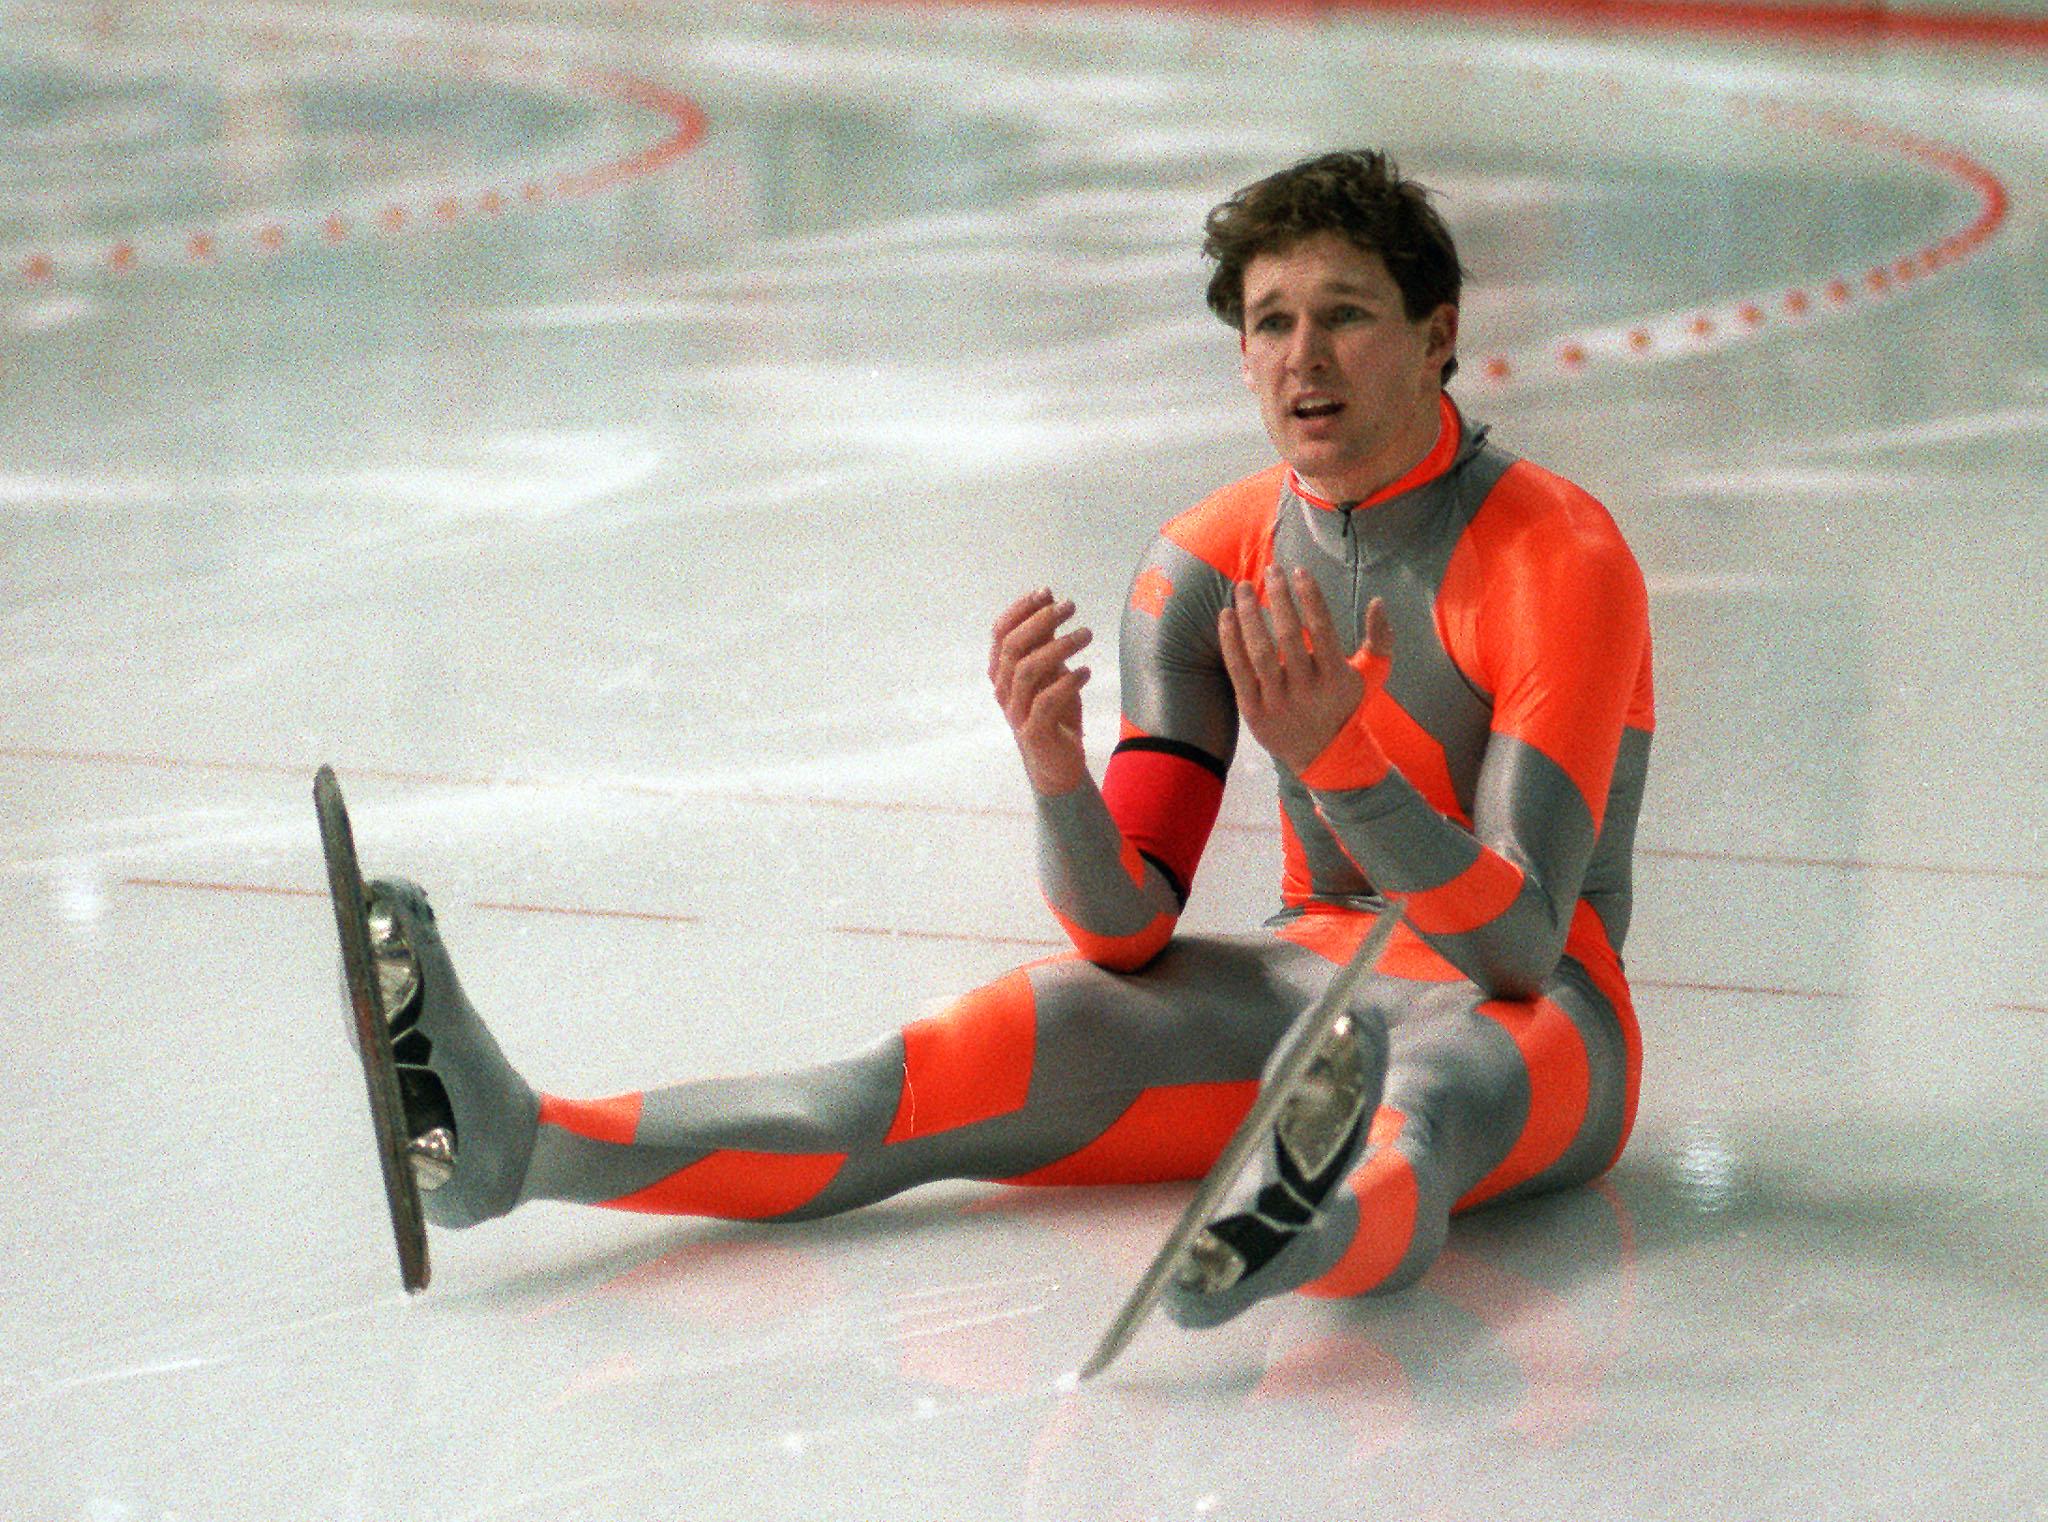 Speed skater Dan Jansen from the United States reacts as he sits on his ice after falling during the men's 1000m event at the Winter Olympic Games 18 February, 1988, in Calgary.